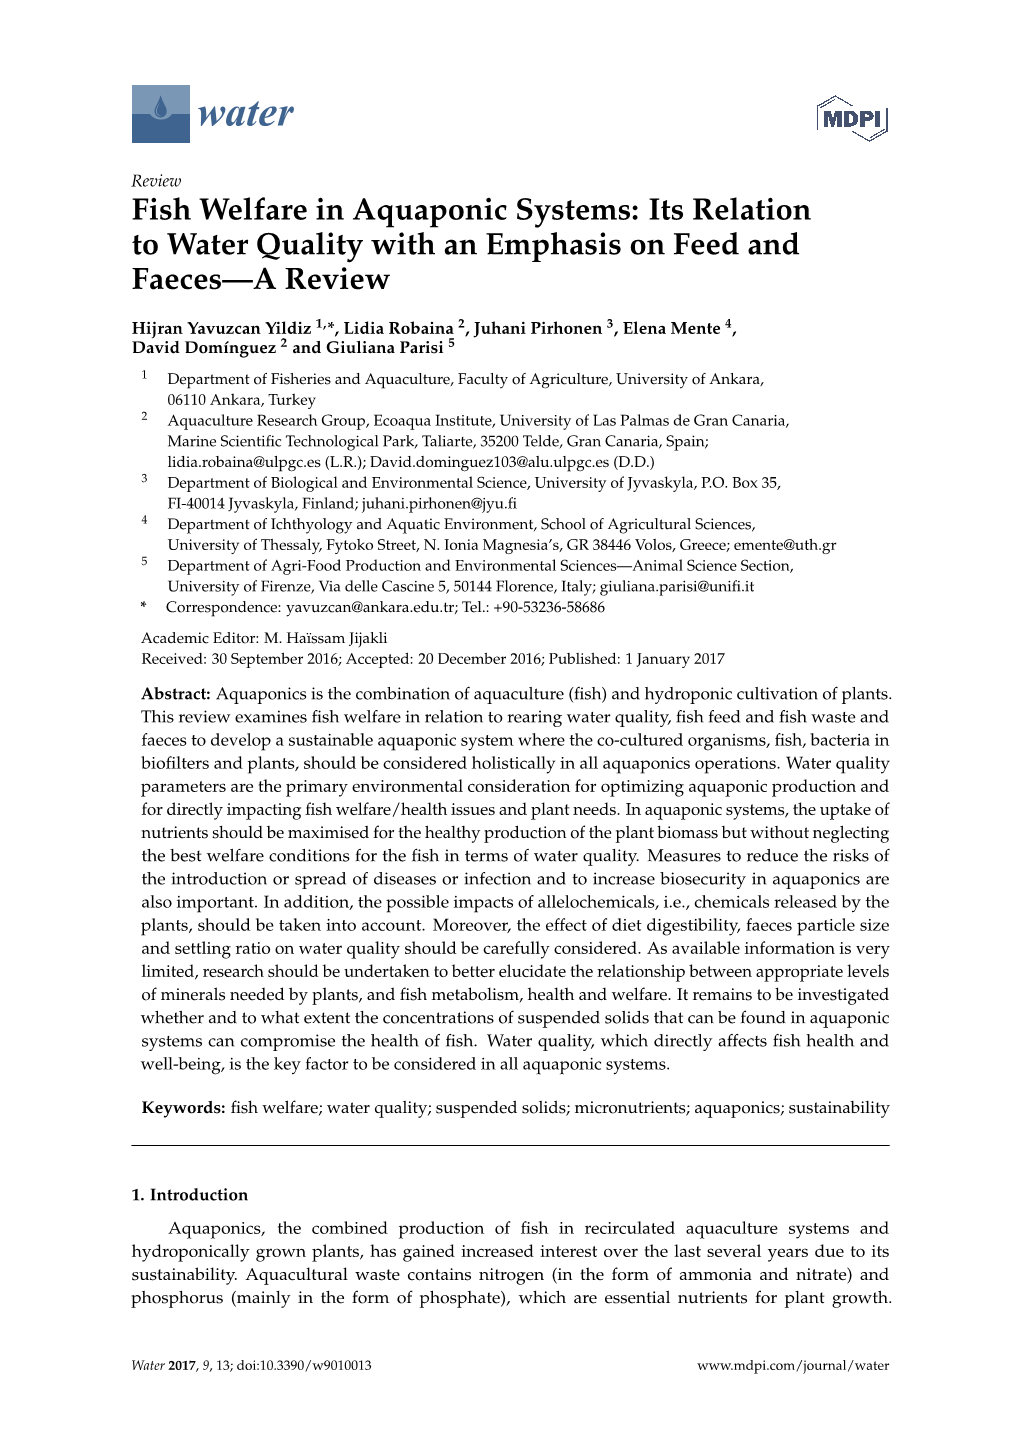 Fish Welfare in Aquaponic Systems: Its Relation to Water Quality with an Emphasis on Feed and Faeces—A Review